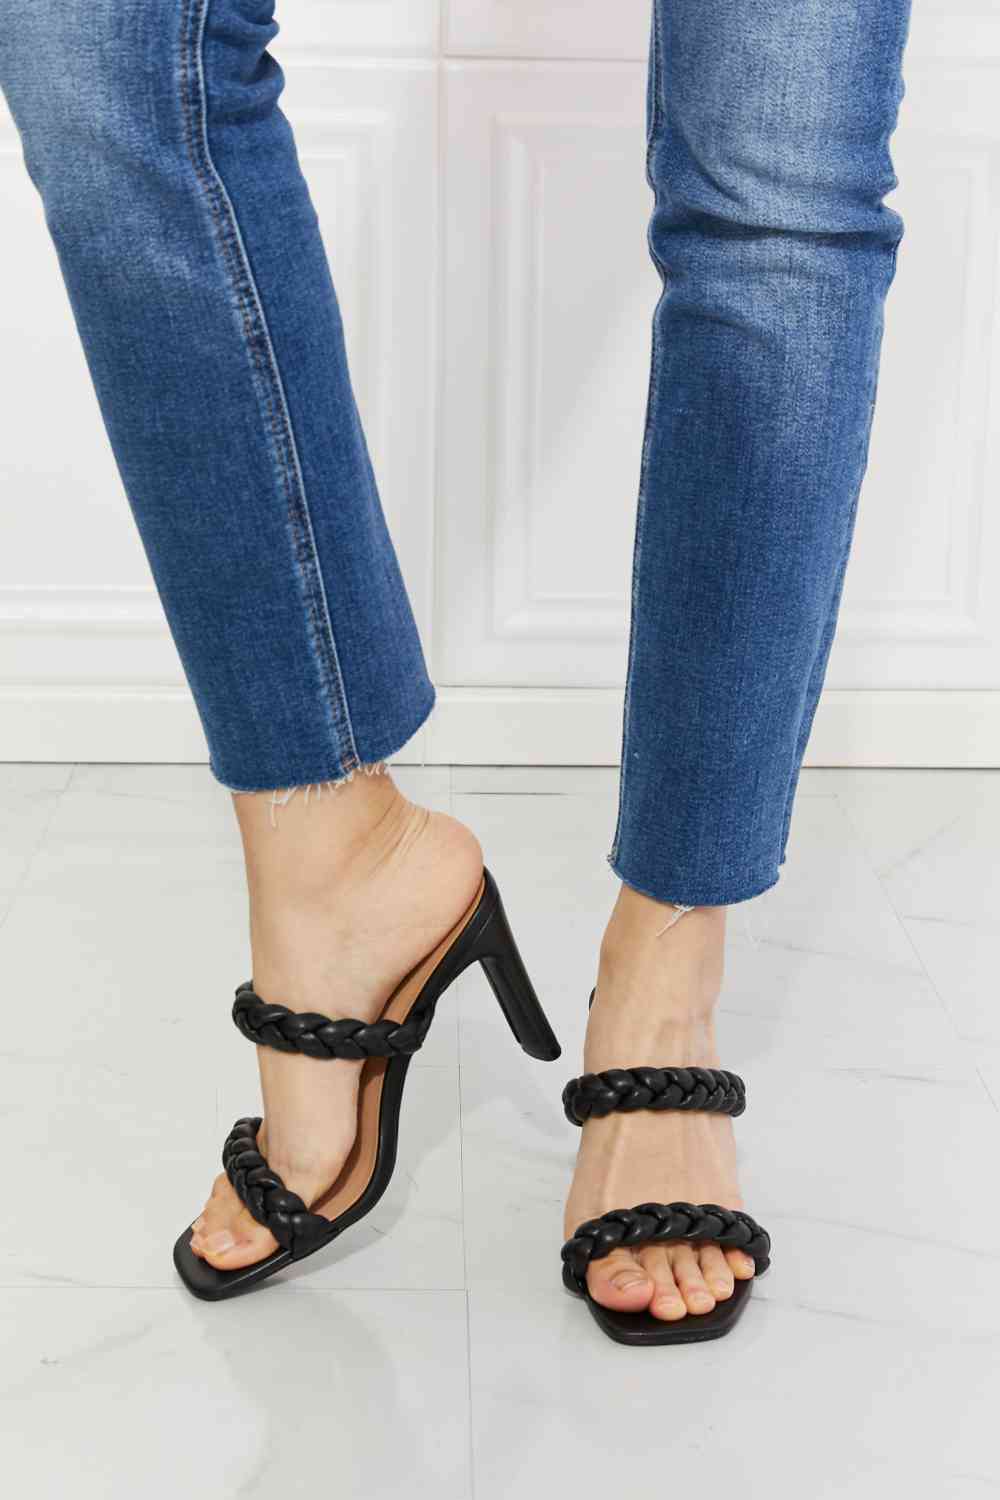 In Love Double Braided Block Heel Sandal in Black - Kawaii Stop - Black Sandals, Block Heels, Braided Bands, Chic Design, Comfortable Heels, Fashionable Sandals, High Heels, Melody, Open Toe, PU Leather, Sandal, Ship from USA, Square Toe, Stylish Footwear, Trendy Footwear, Versatile, Women's Shoes